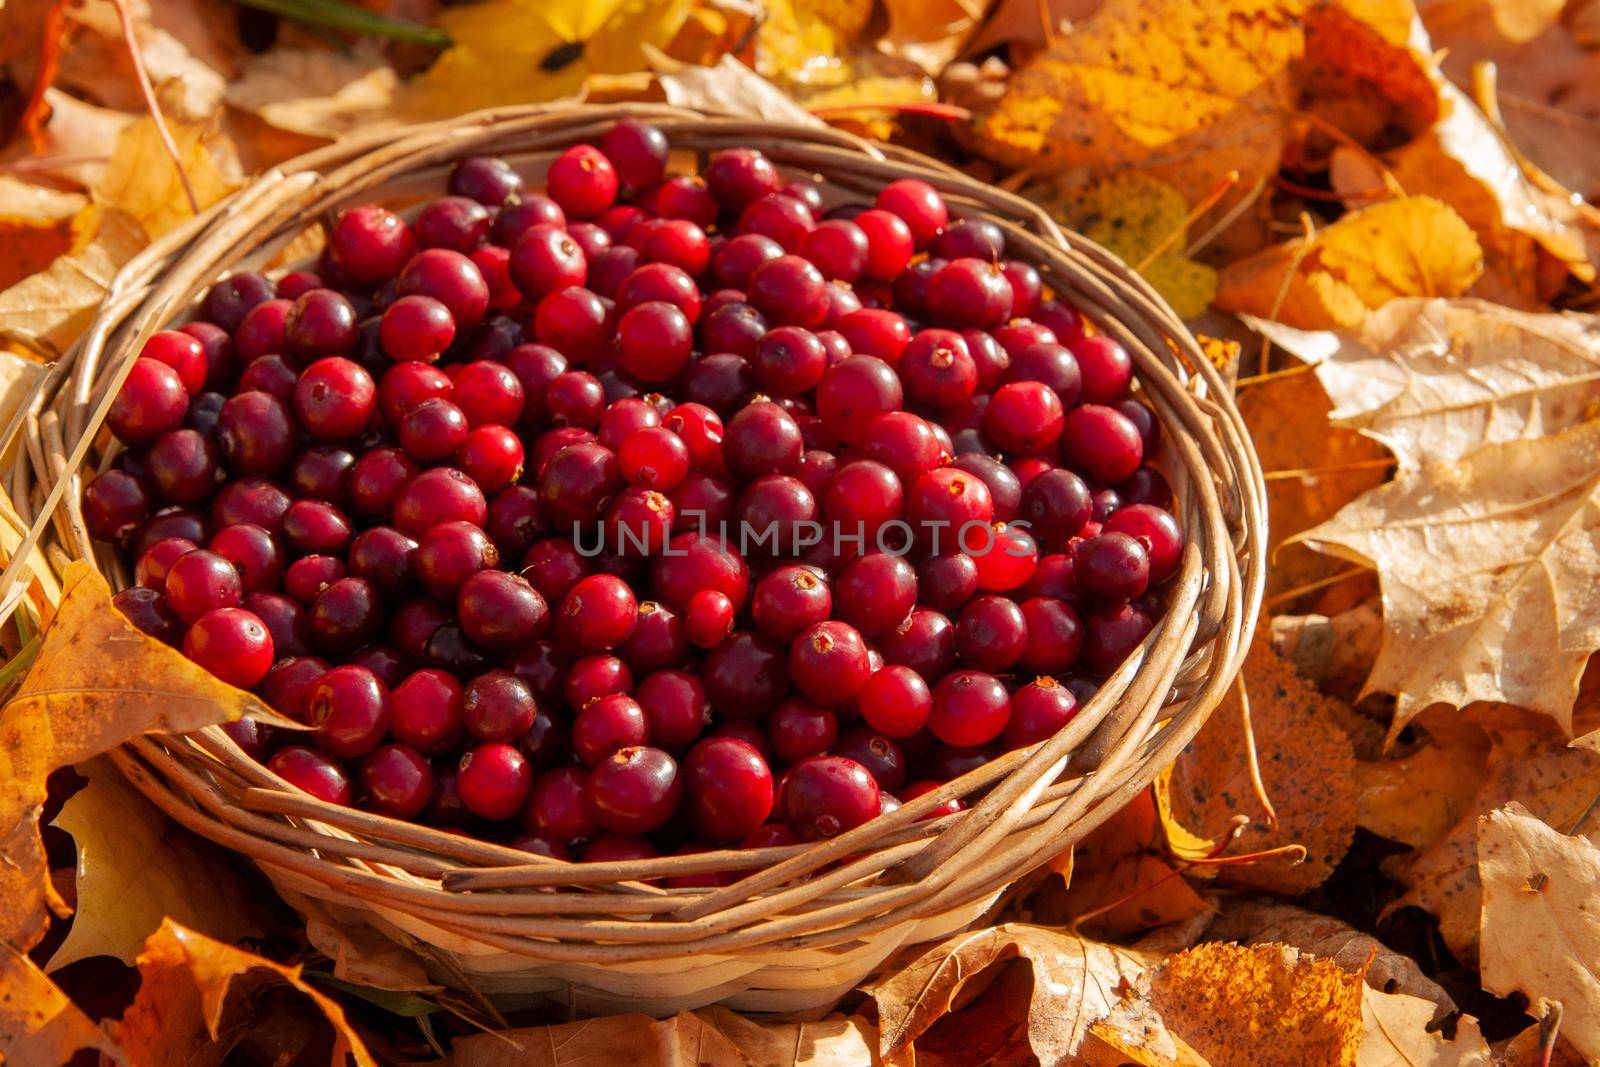 Full basket with juicy red cranberries in a basket on an autumn background of fallen leaves with copy space. Cranberry national holiday and Thanksgiving Day.